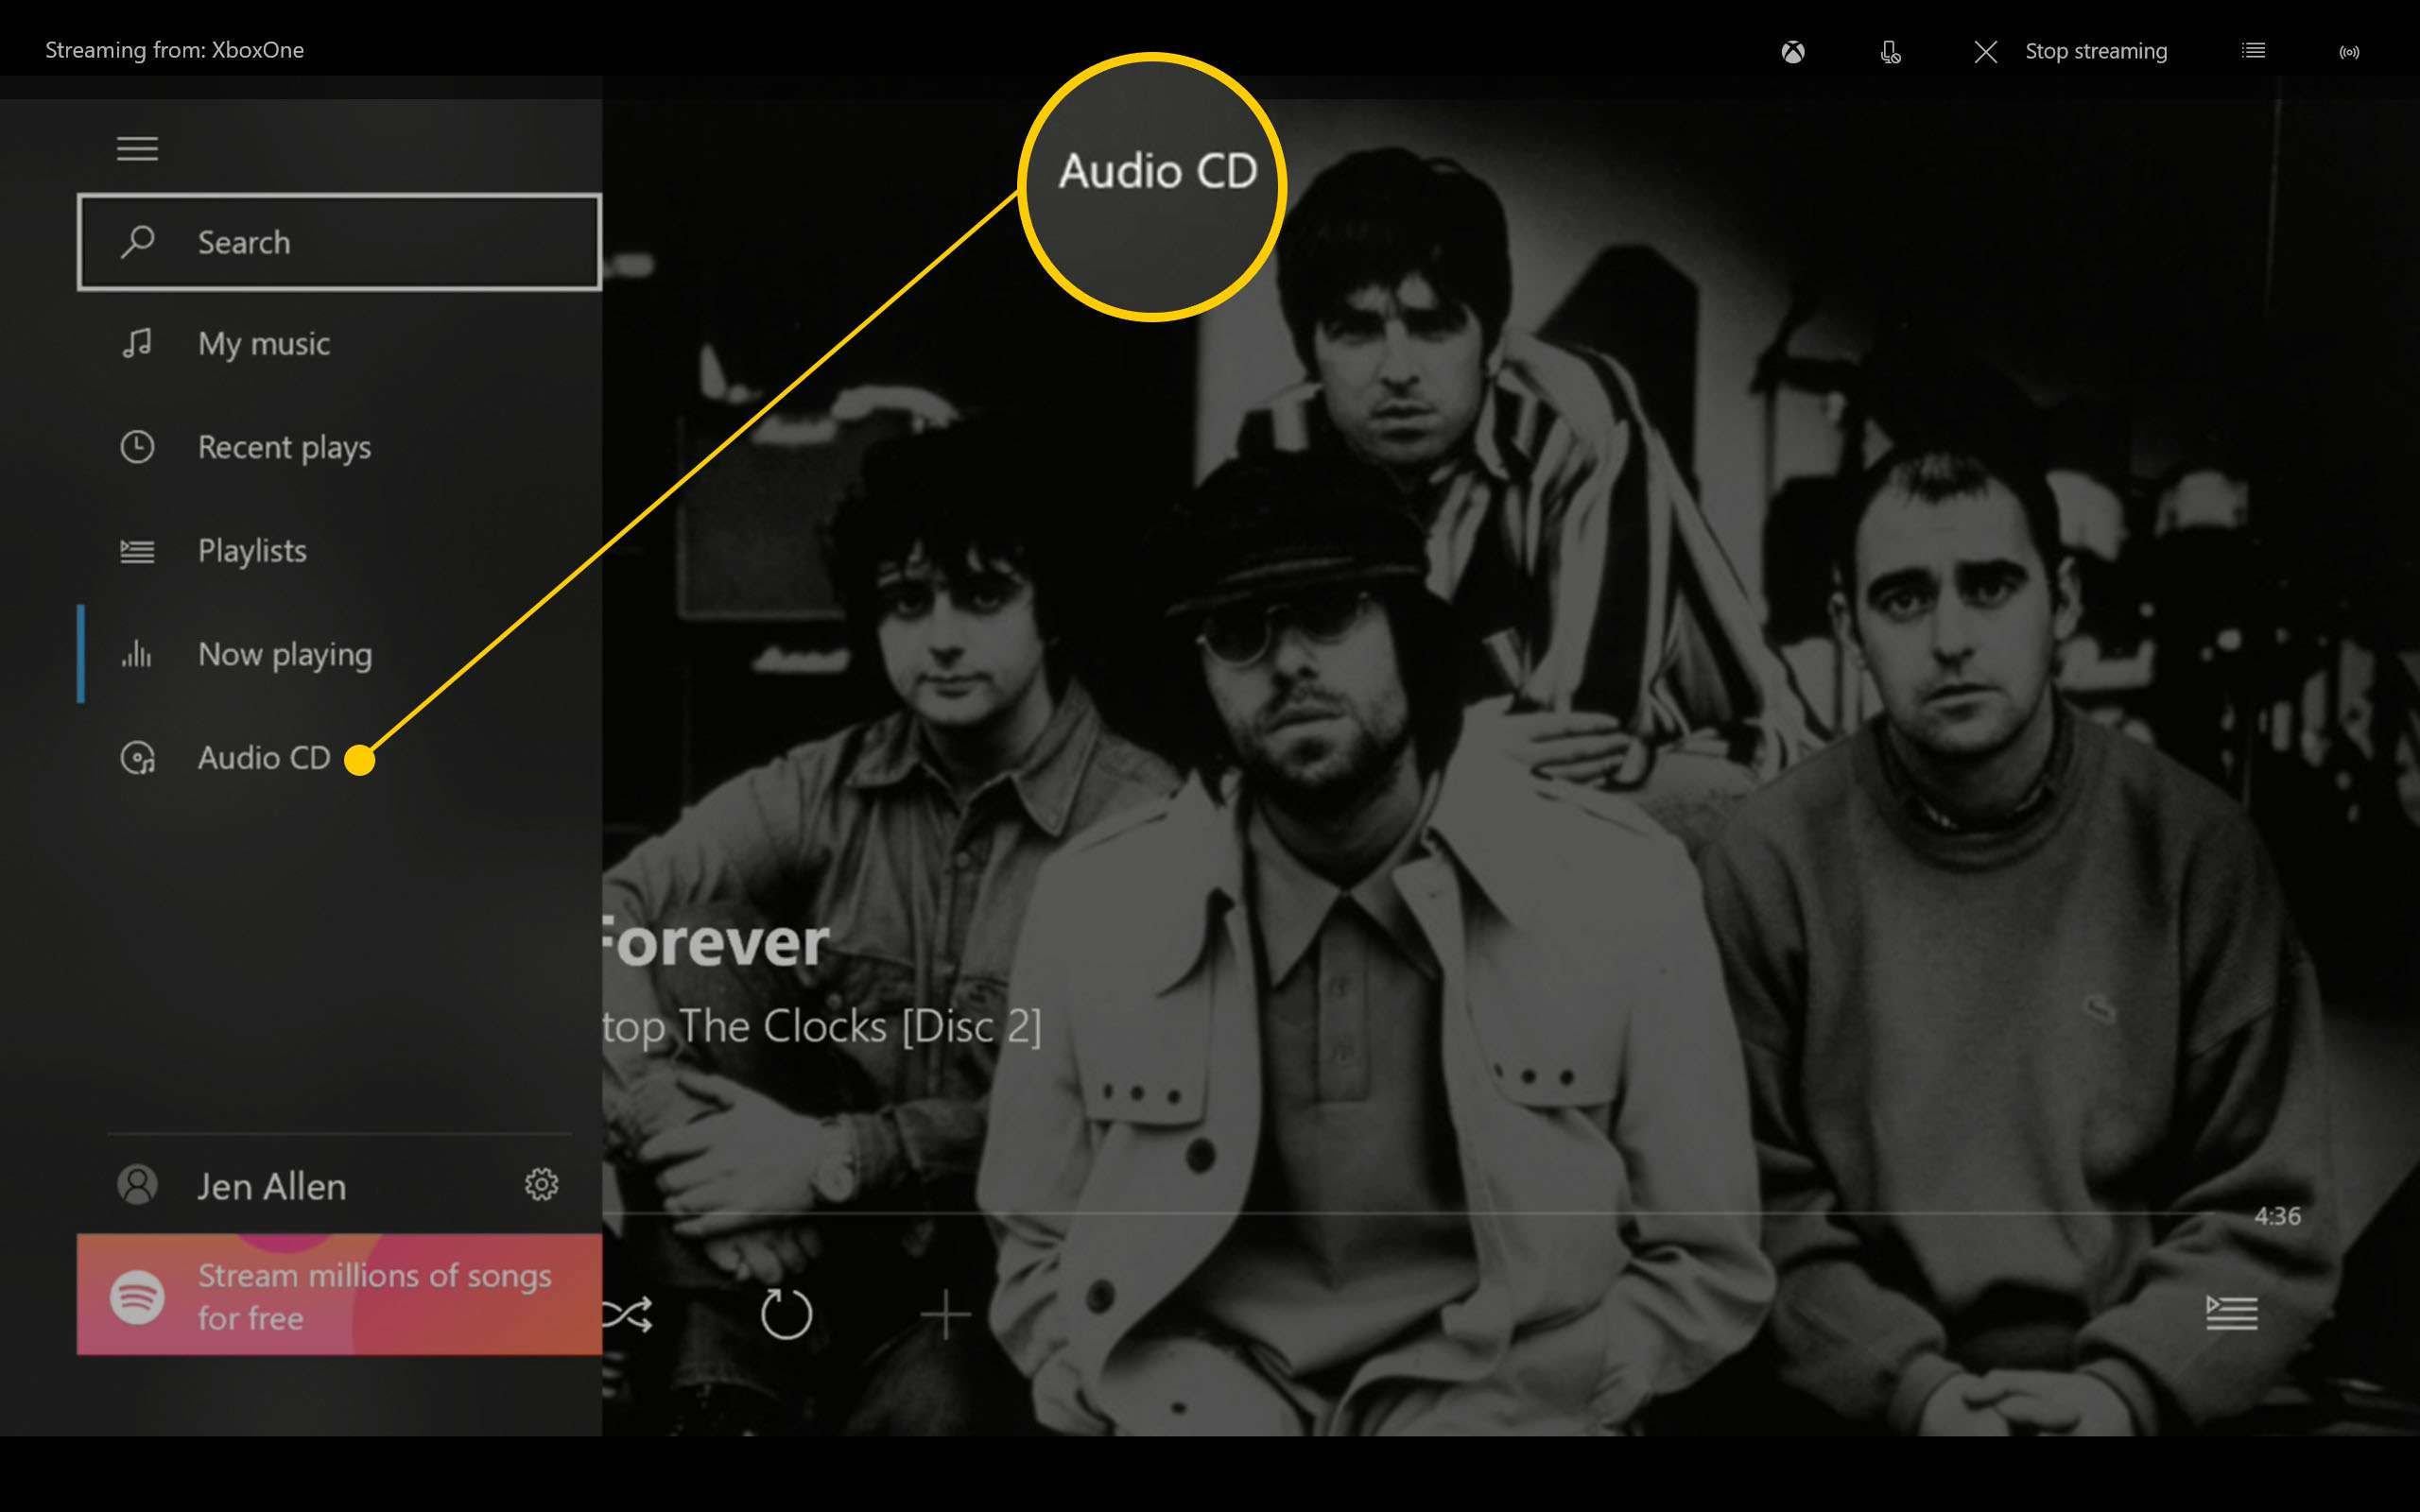 Xbox One's Groove Music app automatically playing an audio CD